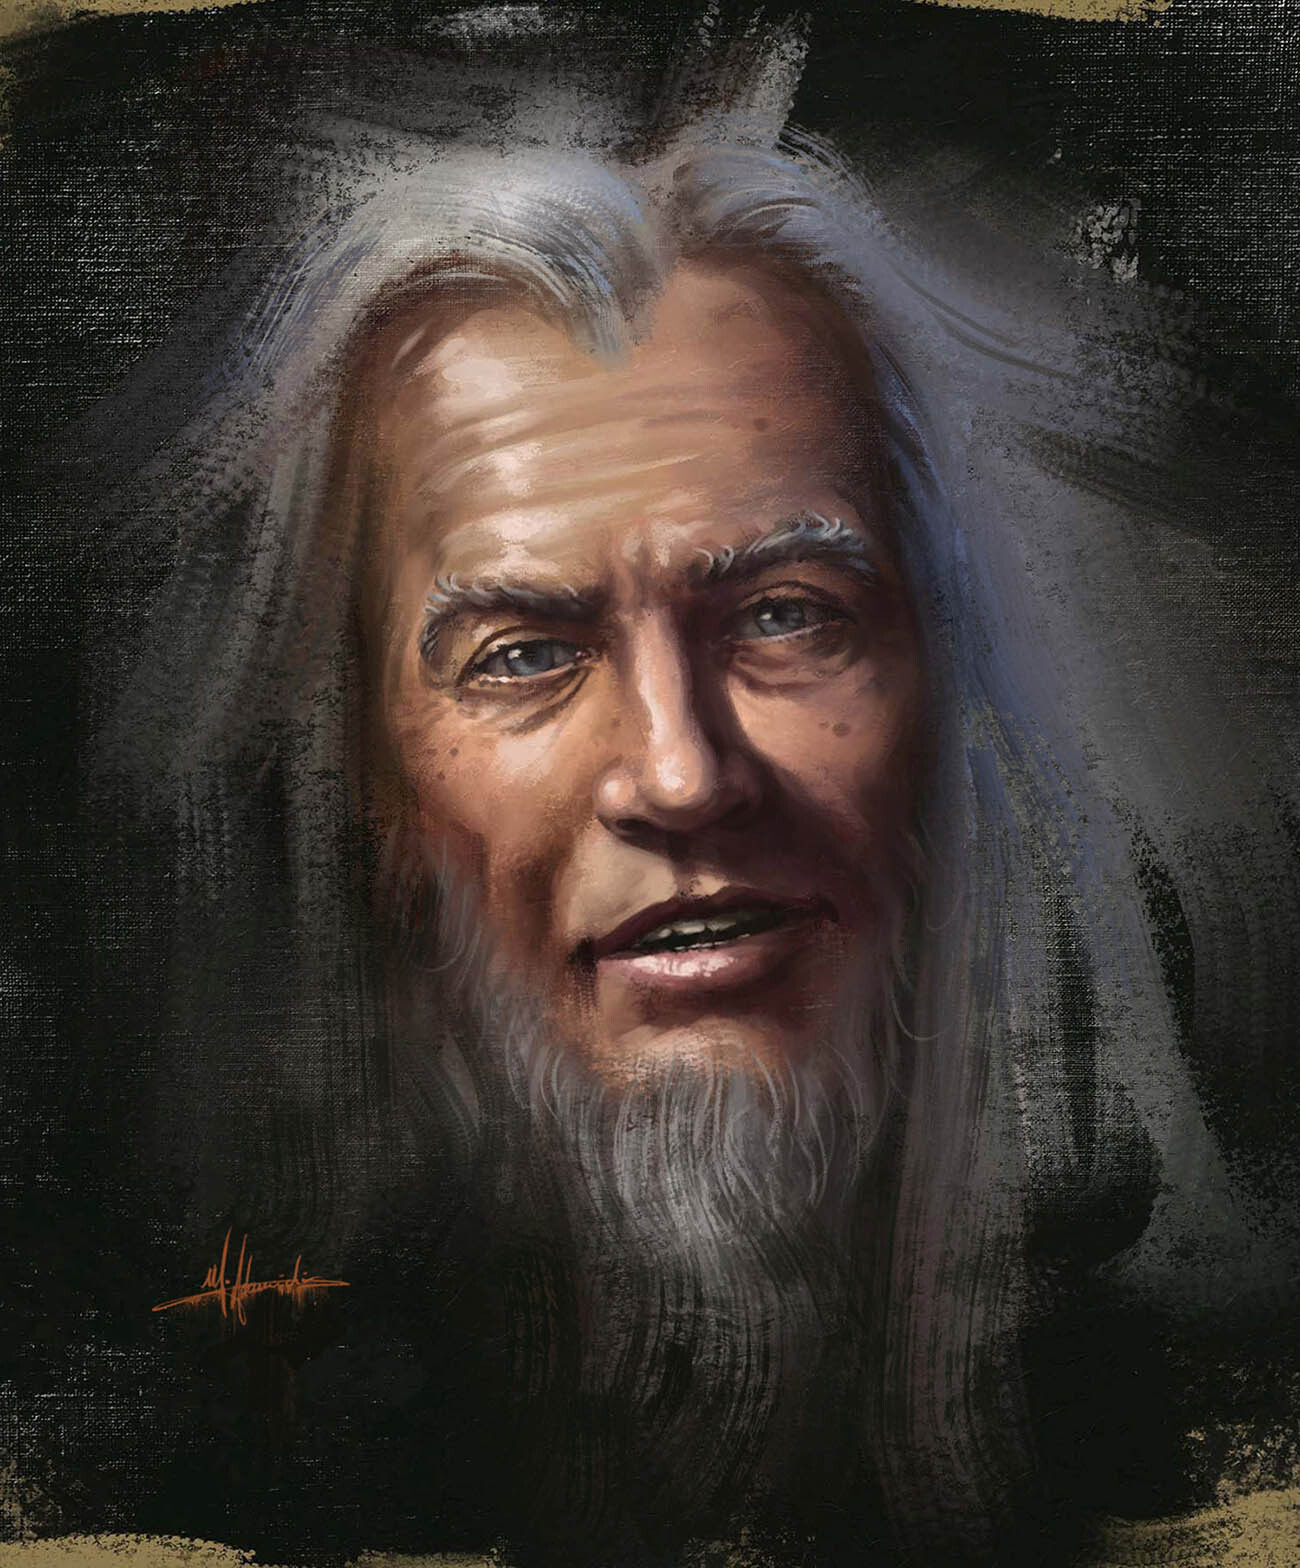 Digital Portrait Painting - Old Native Man + Small Video